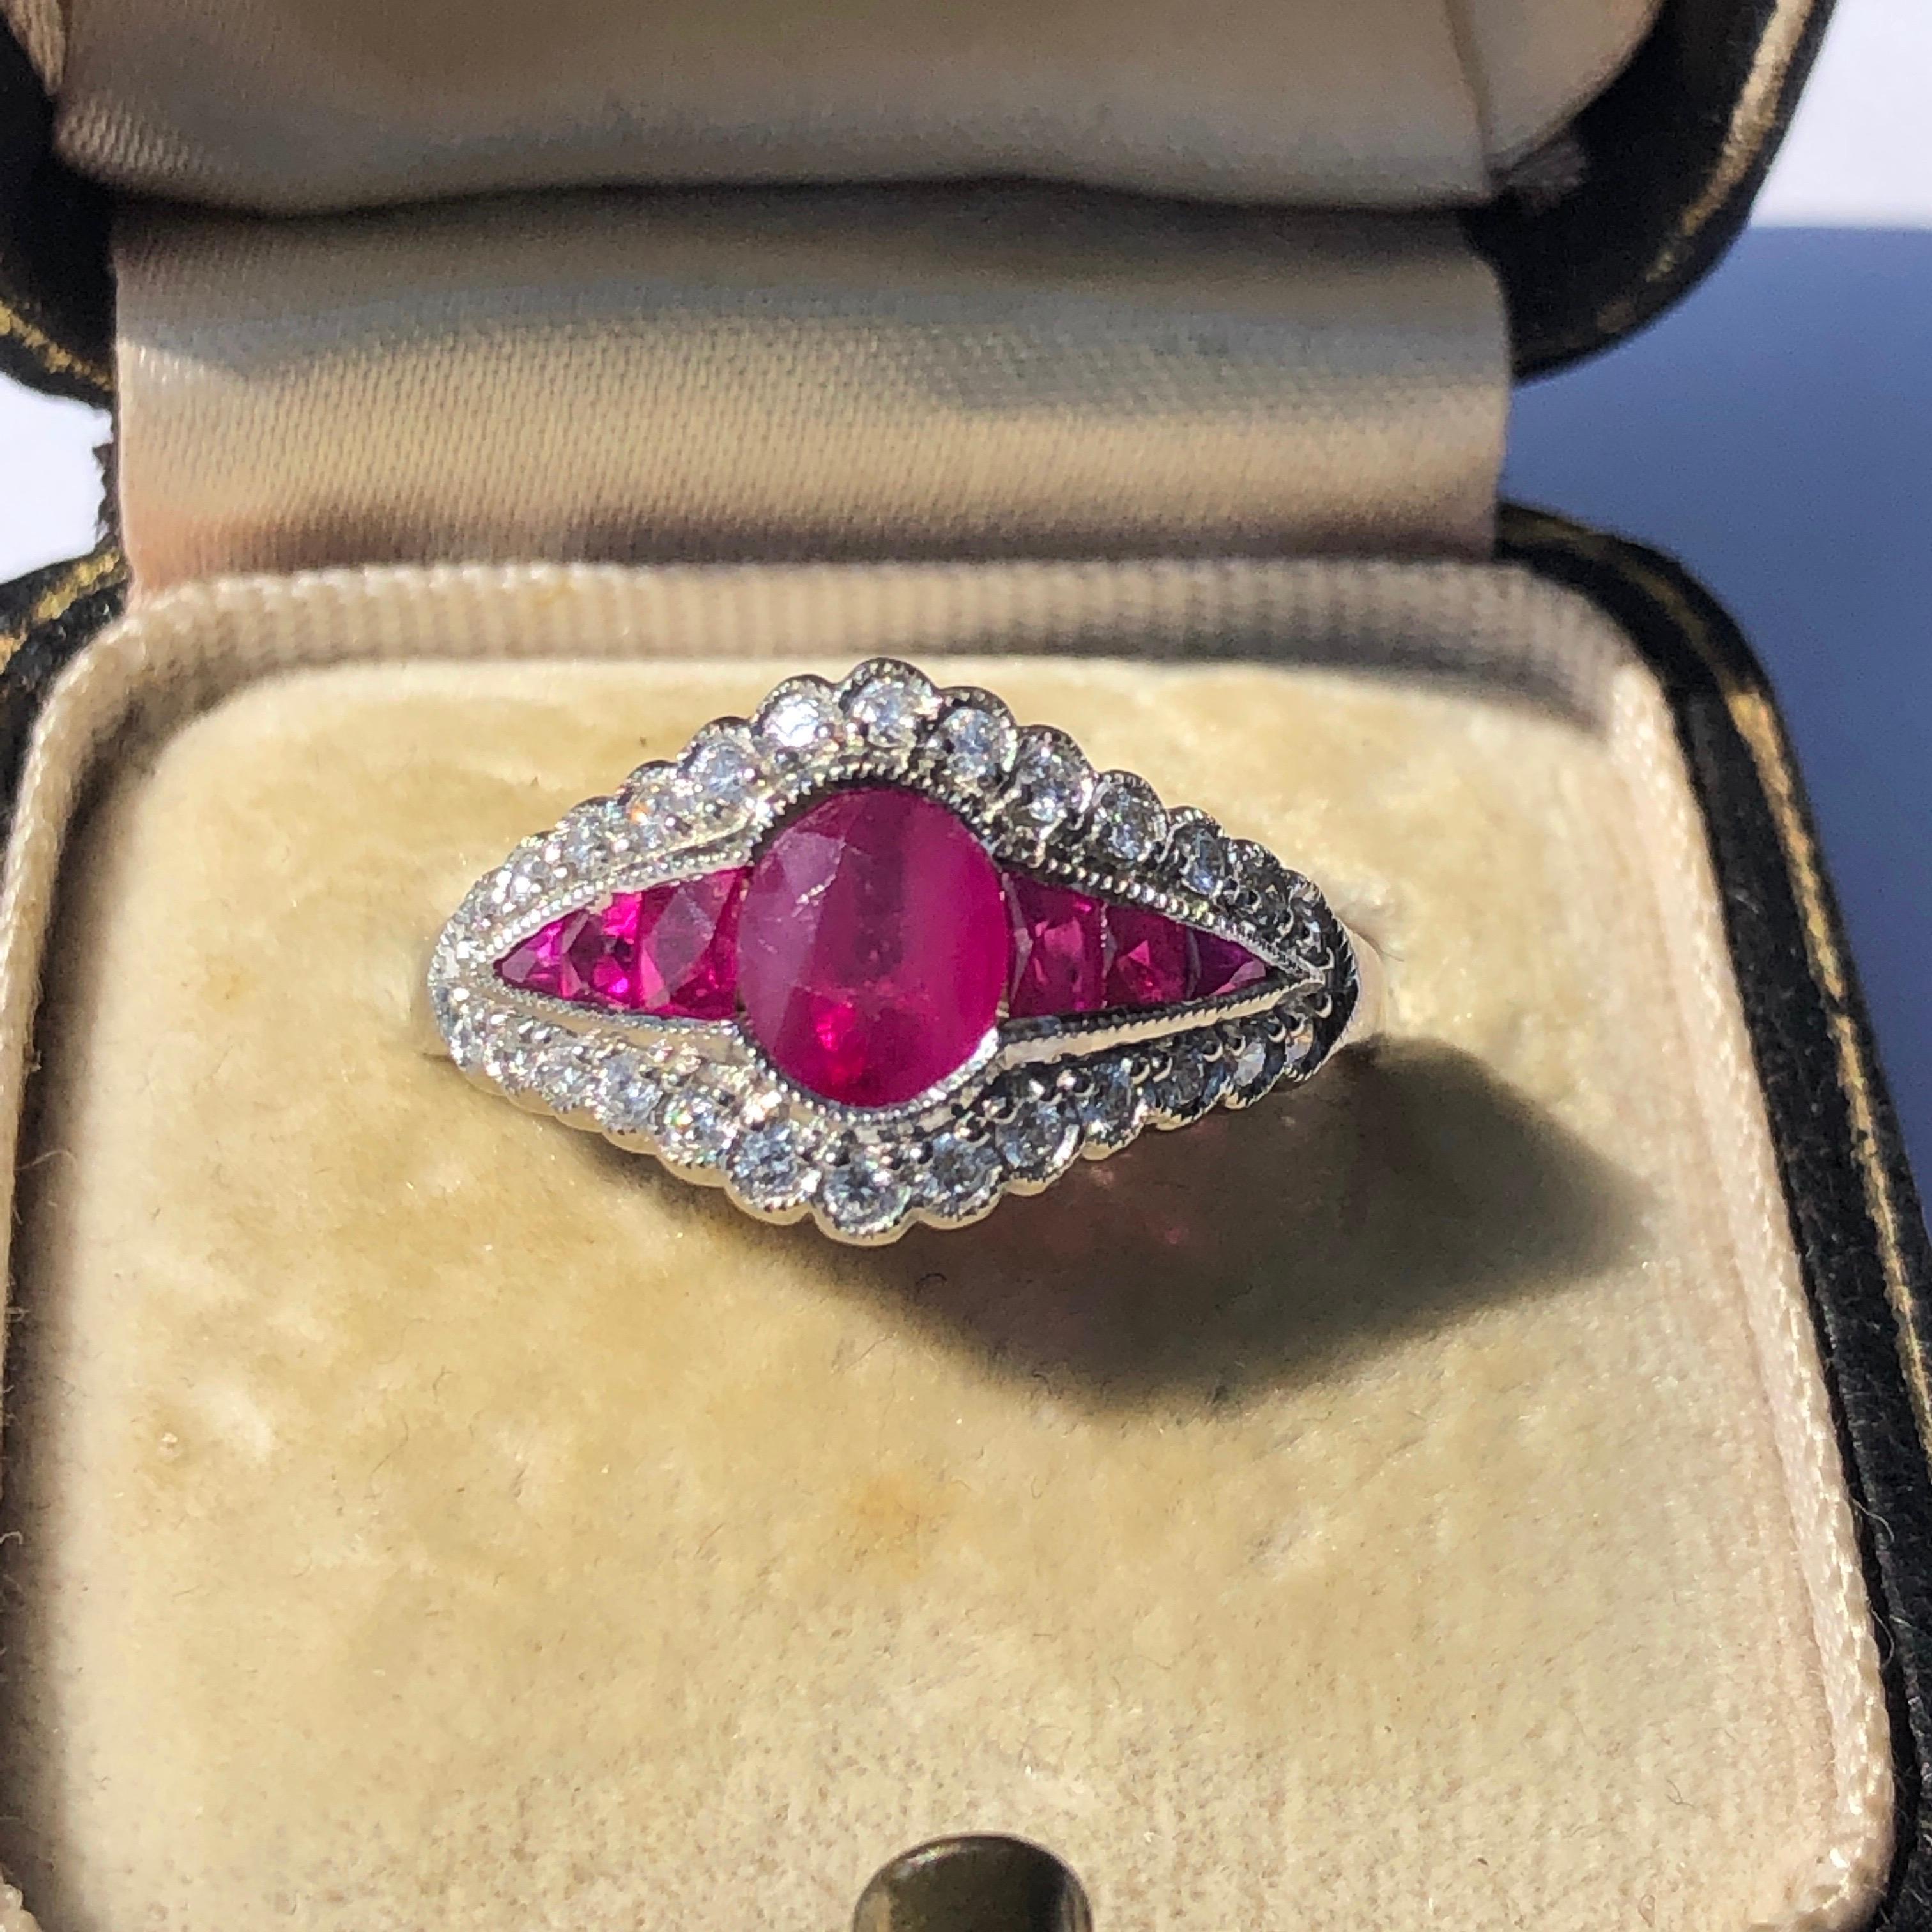 The design of this ring is absolutely show stopping! The rubies total 1.30ct and the diamonds .26ct G/H colour VS S1. The rubies are a gorgeous bright pink colour. The central ruby is an oval shape and the stones either side are tapered down to a